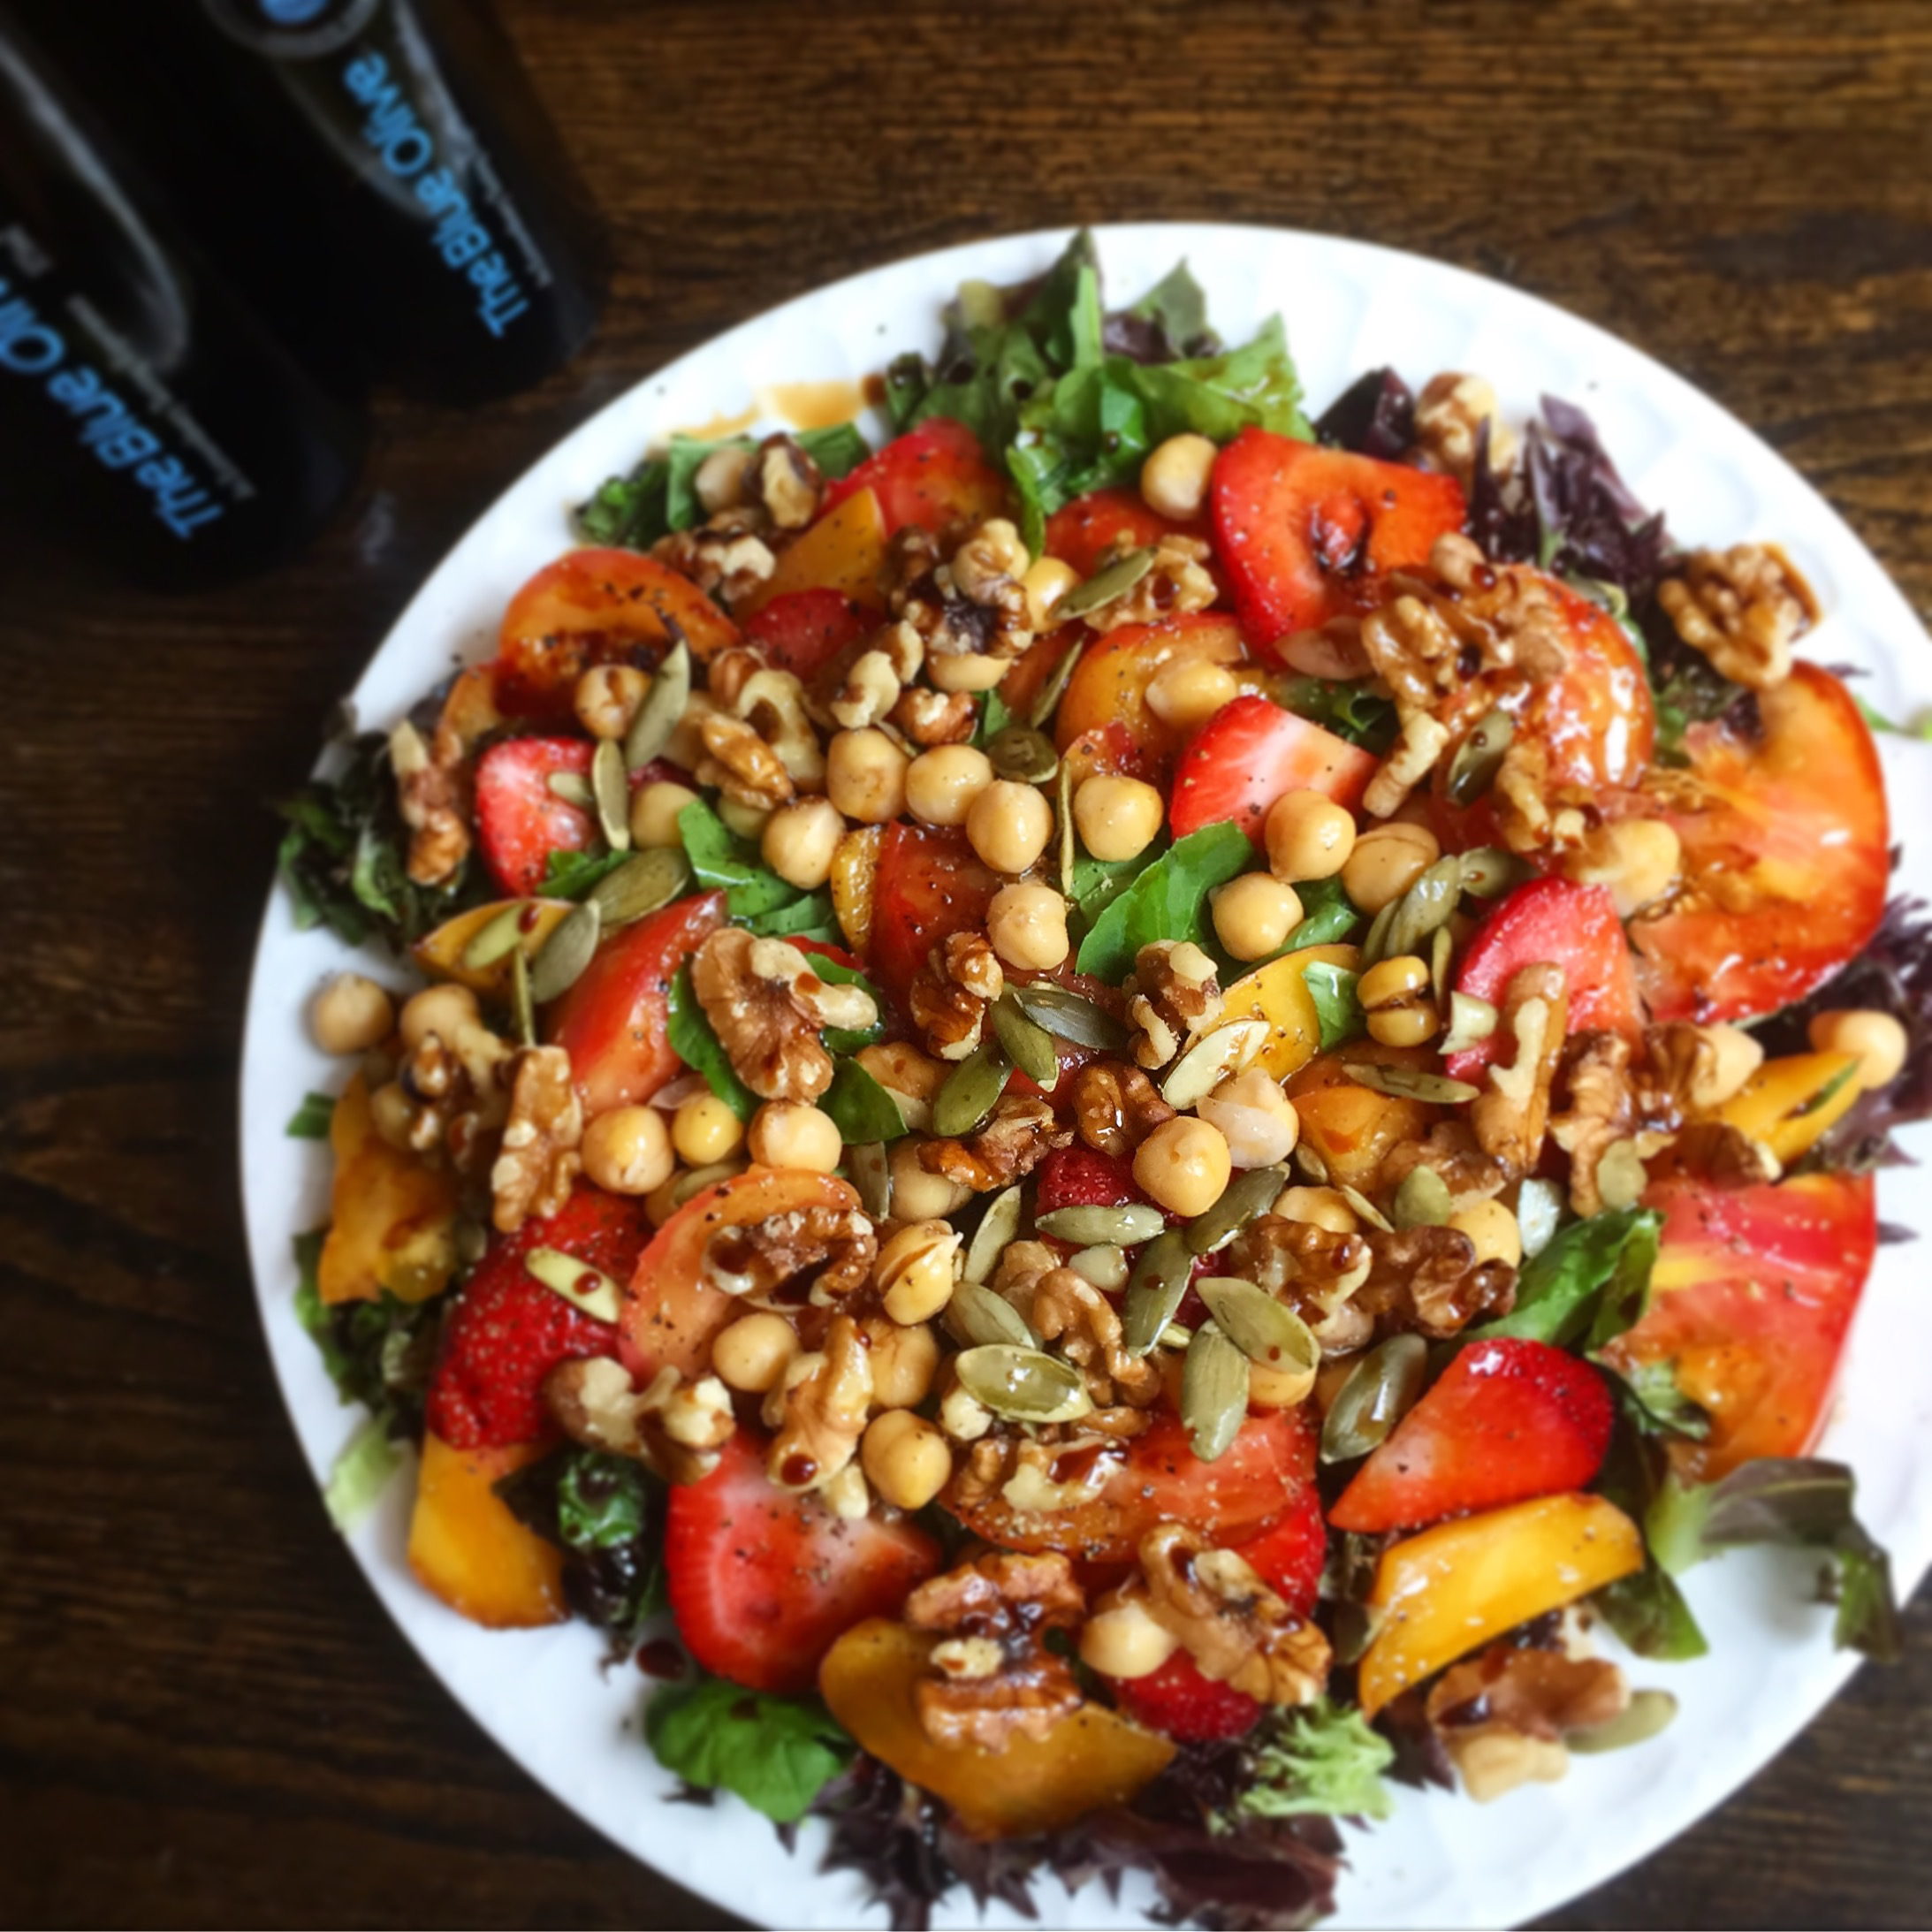 End-of-summer Produce Salad with Roasted Walnut Oil Dressing